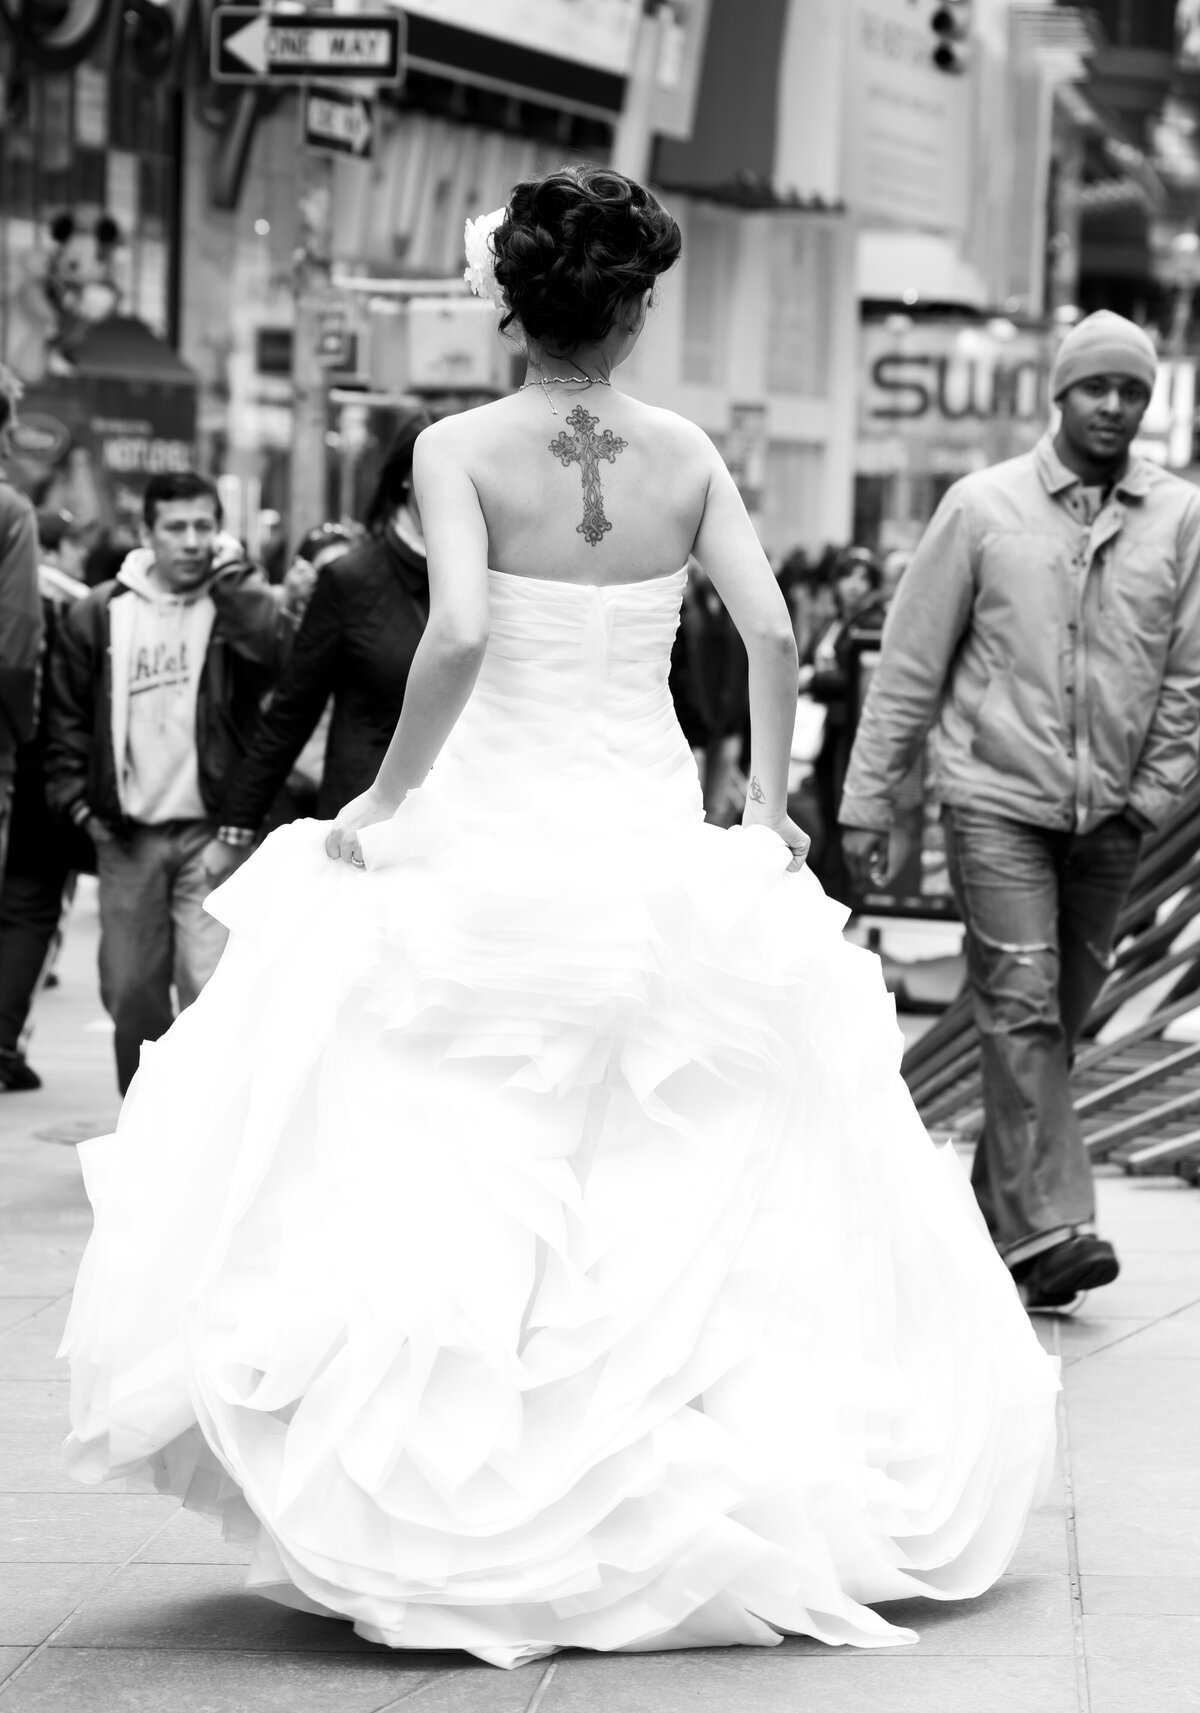 A black and white photograph capturing a bride in a voluminous wedding gown standing  in Times Square, New York City. her back is to  the camera, showcasing a detailed cross tattoo on her upper bak. Her hair is styled elegantly in an updo with a flower accessory.  the bustling city life continues around her, with pedestrians in various attire walking by, unfazed by the bride's presence.